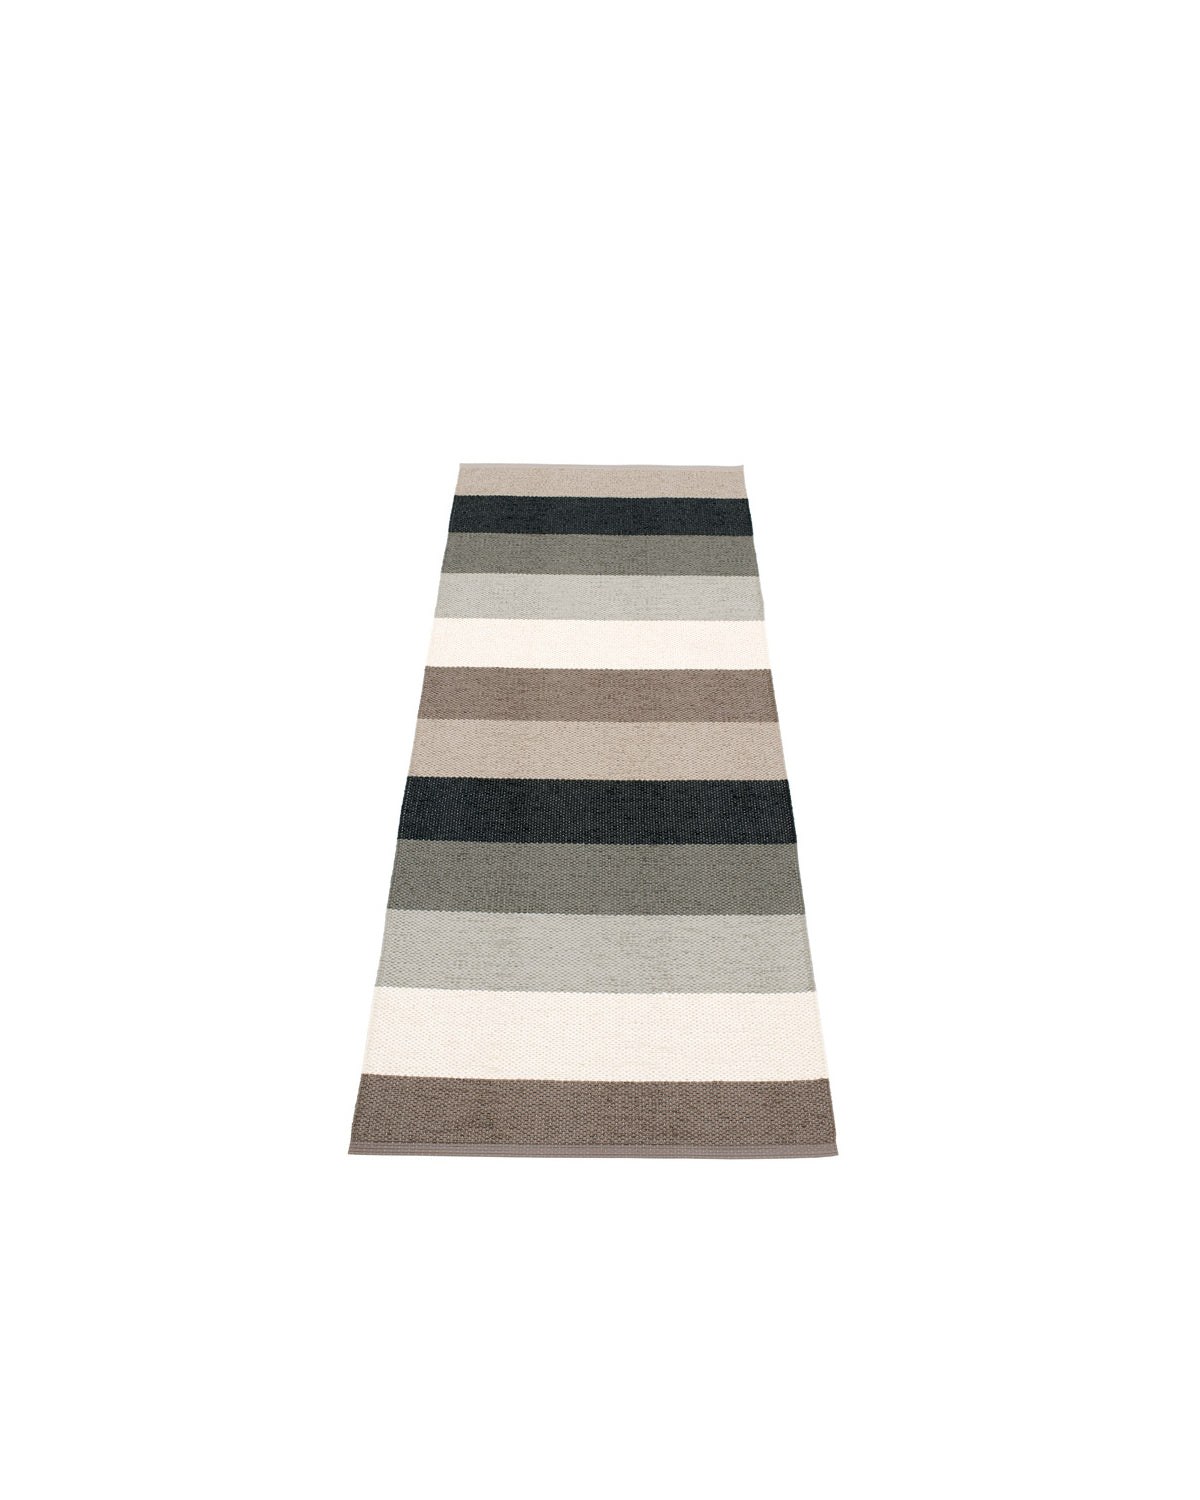 Pappelina Rug MOLLY Mud  image 1